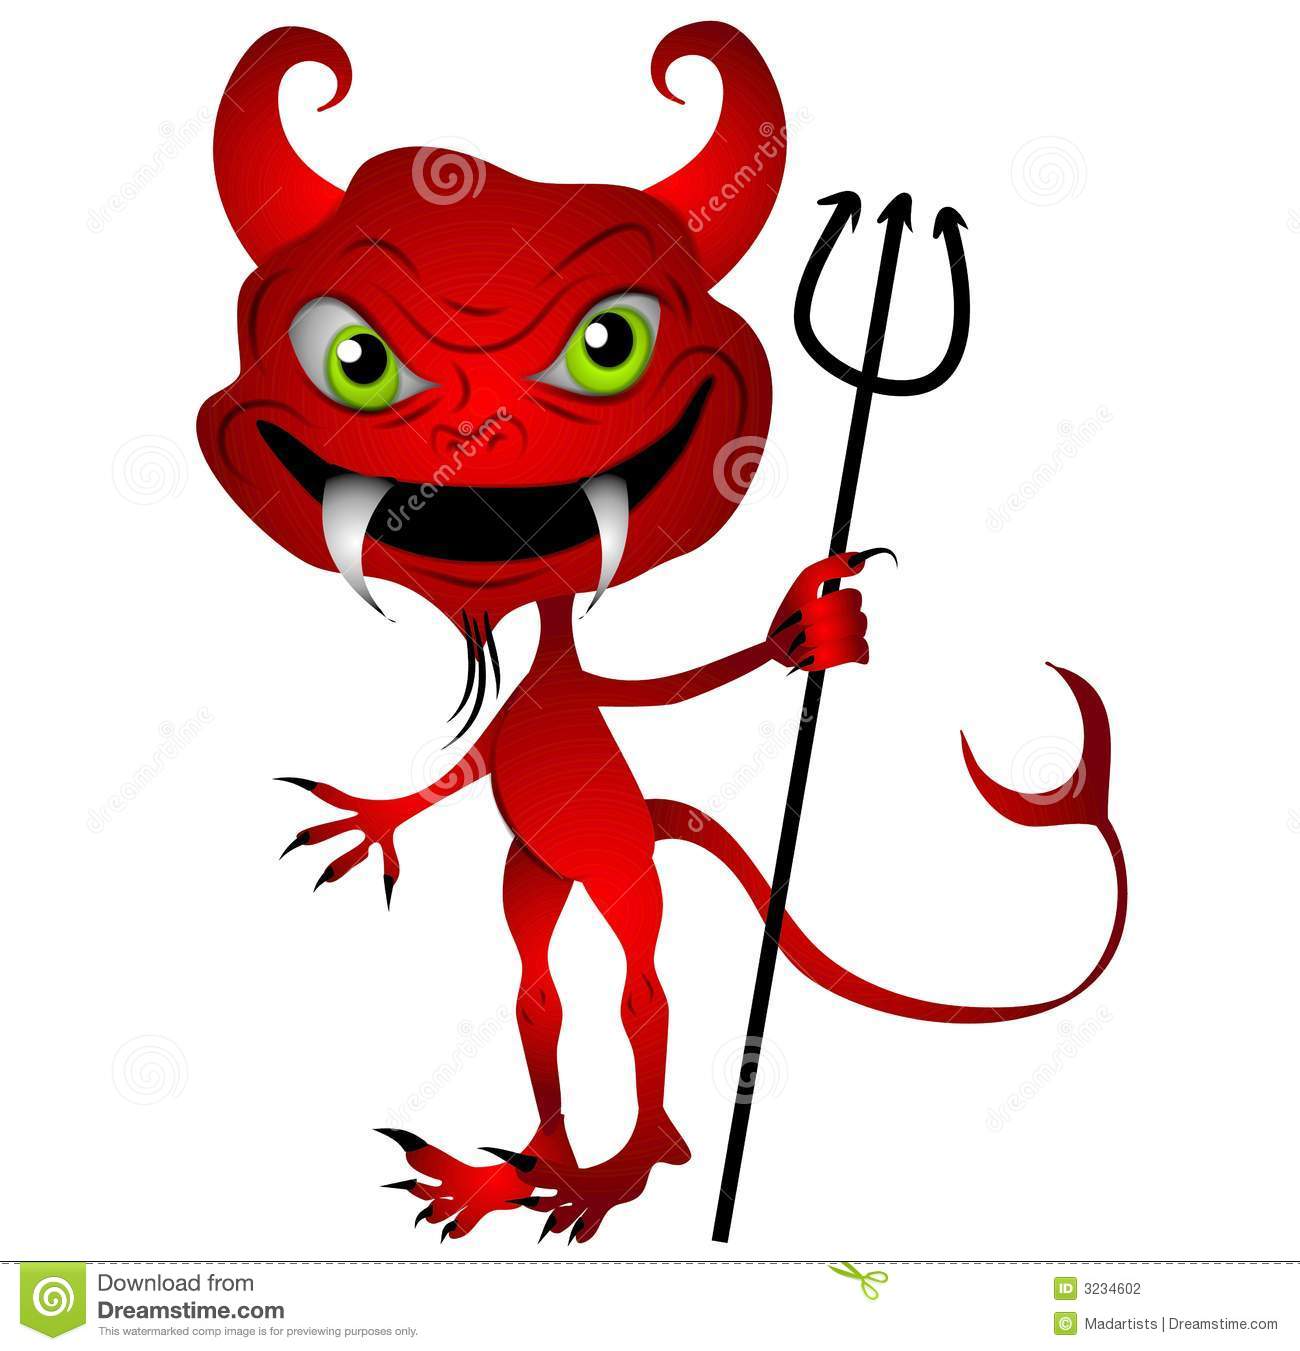 Clip Art Illustration Of A Little Cartoon Red Devil With Green Eyes